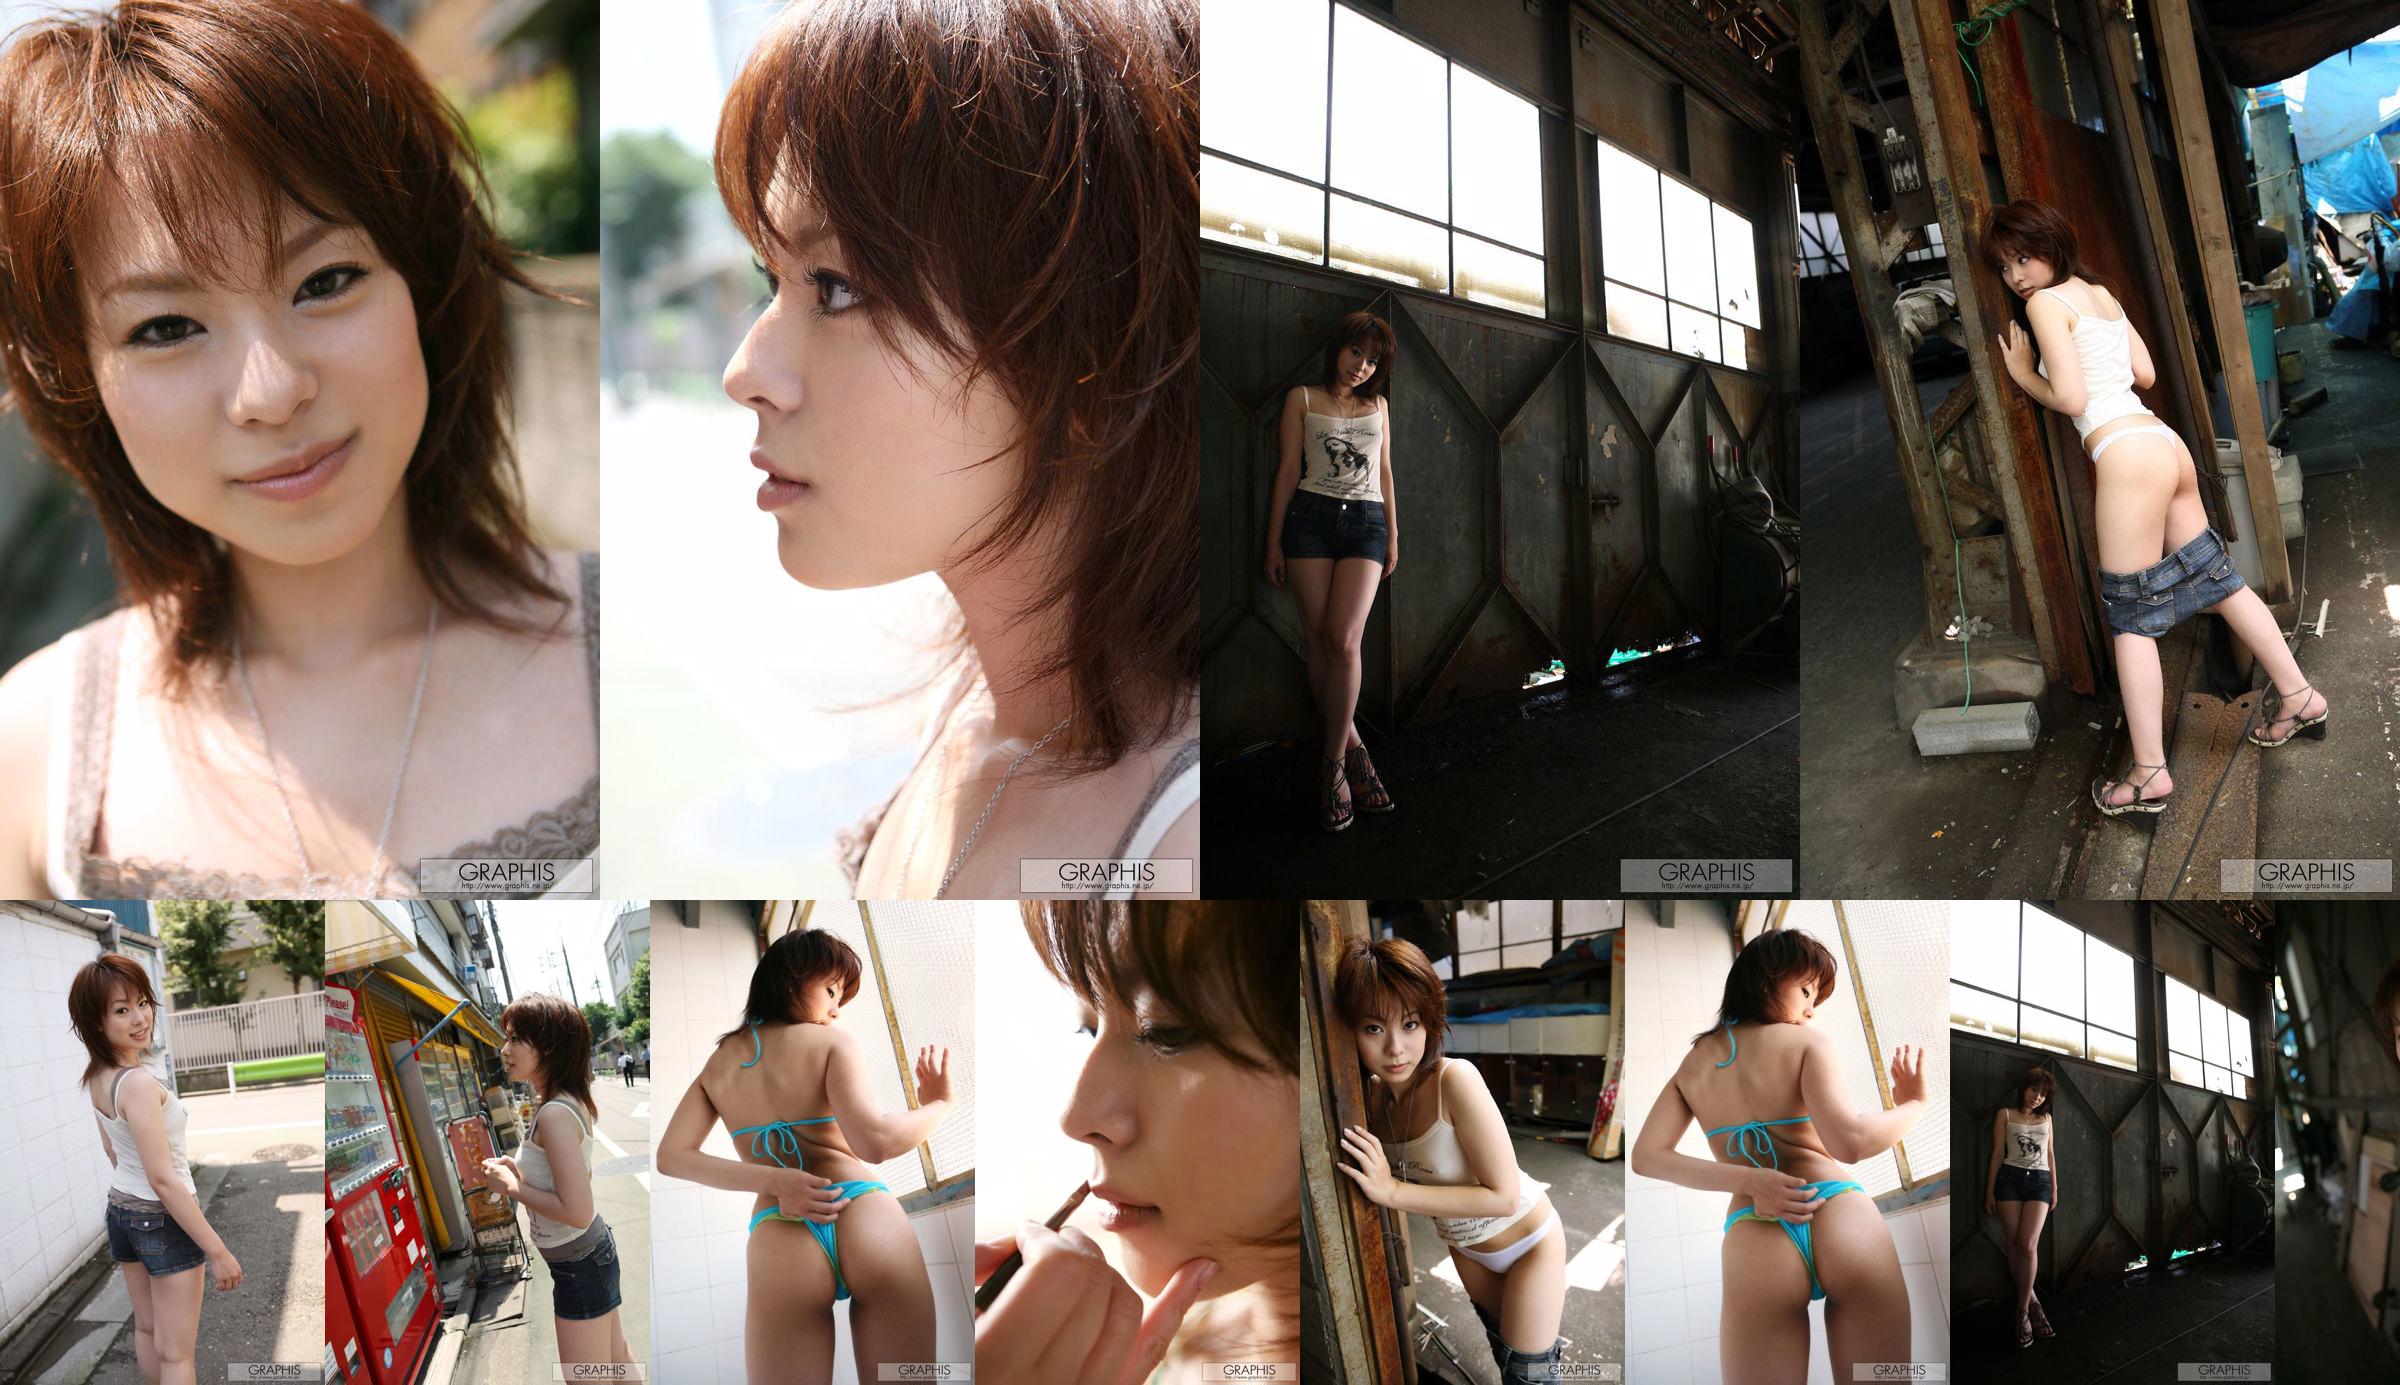 Mina Manabe Mina Manabe [Graphis] First Gravure First Take Off Daughter No.93b9a7 หน้า 7